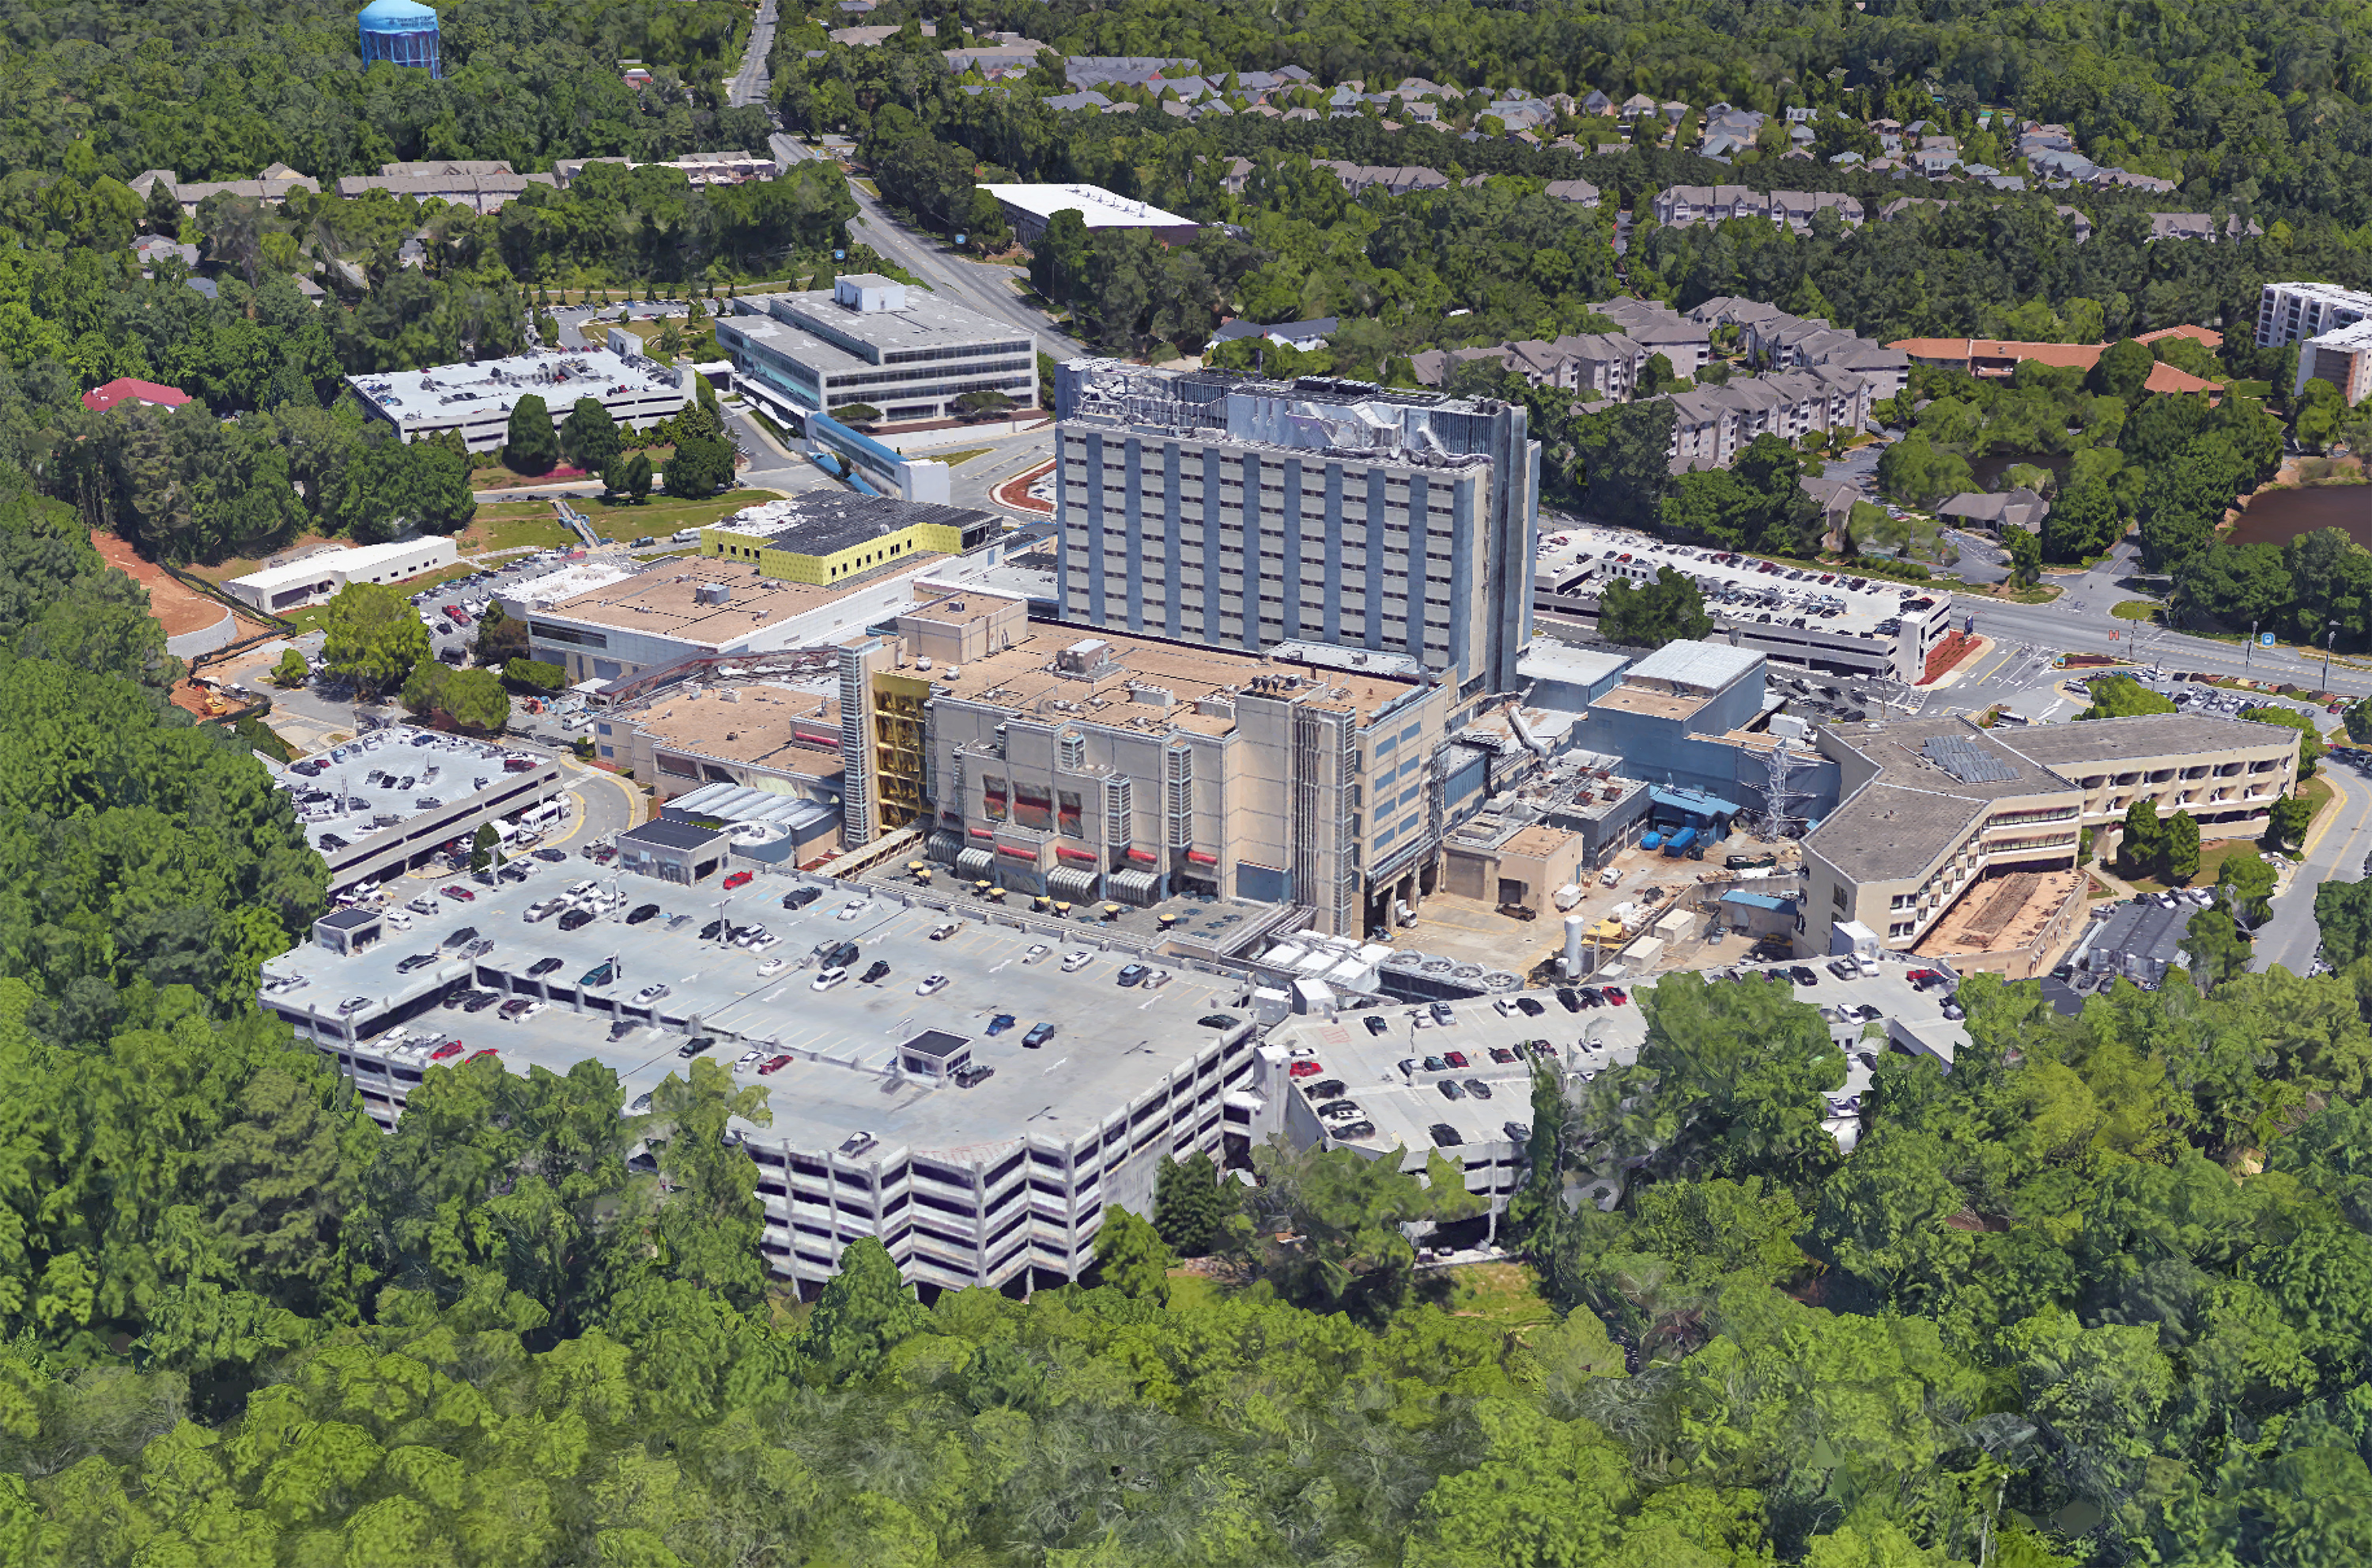 The Veterans Health Administration serves more than 8 million veterans a year through more than 1,700 sites of care. Among them is the Atlanta VA Medical Center, shown here. (Credit: VHA)

 